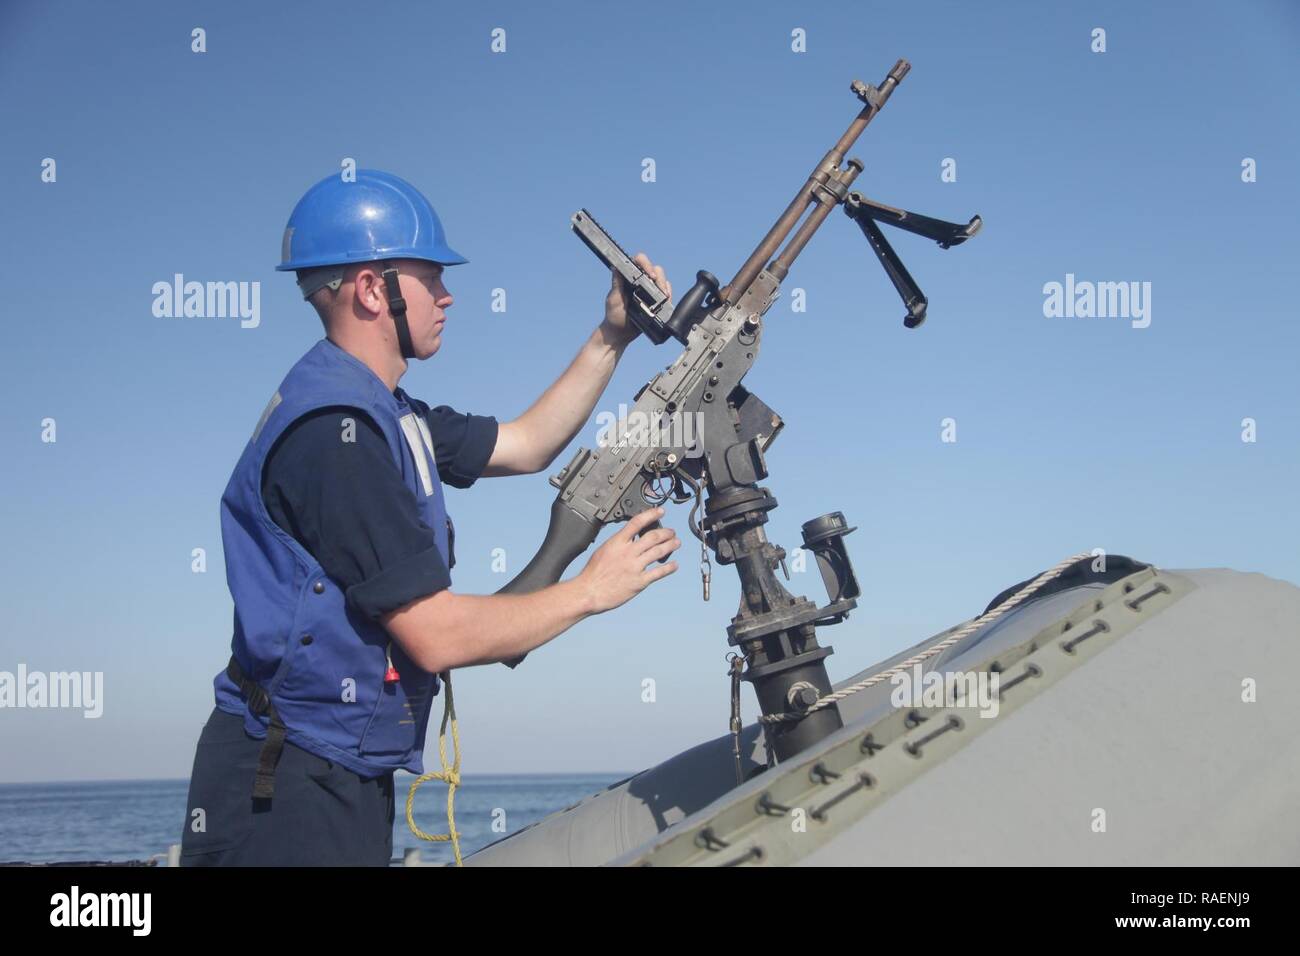 GULF OF OMAN (Dec. 13, 2018) A U.S. Navy Sailor performs a safety check on an M240B machine gun aboard the Cyclone-class coastal patrol ship USS Thunderbolt (PC 12)  in the Gulf of Oman. Thunderbolt is deployed to the U.S. 5th Fleet area of operations in support of naval operations to ensure maritime stability and security in the Central Region, connecting the Mediterranean and the Pacific through the western Indian Ocean and three strategic choke points. Stock Photo